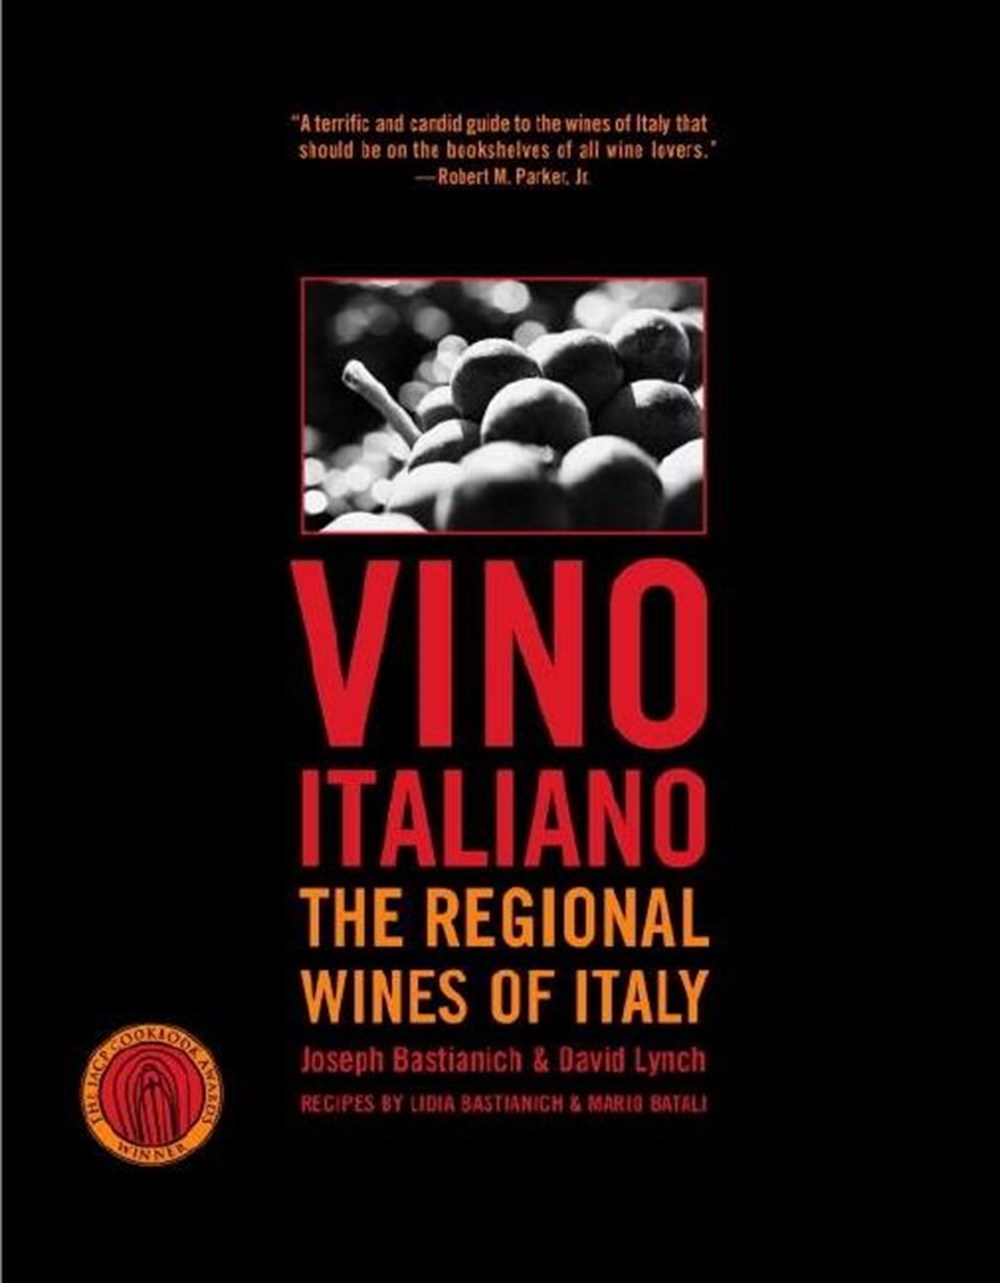 Vino Italiano: The Regional Wines of Italy (Revised and Updated)